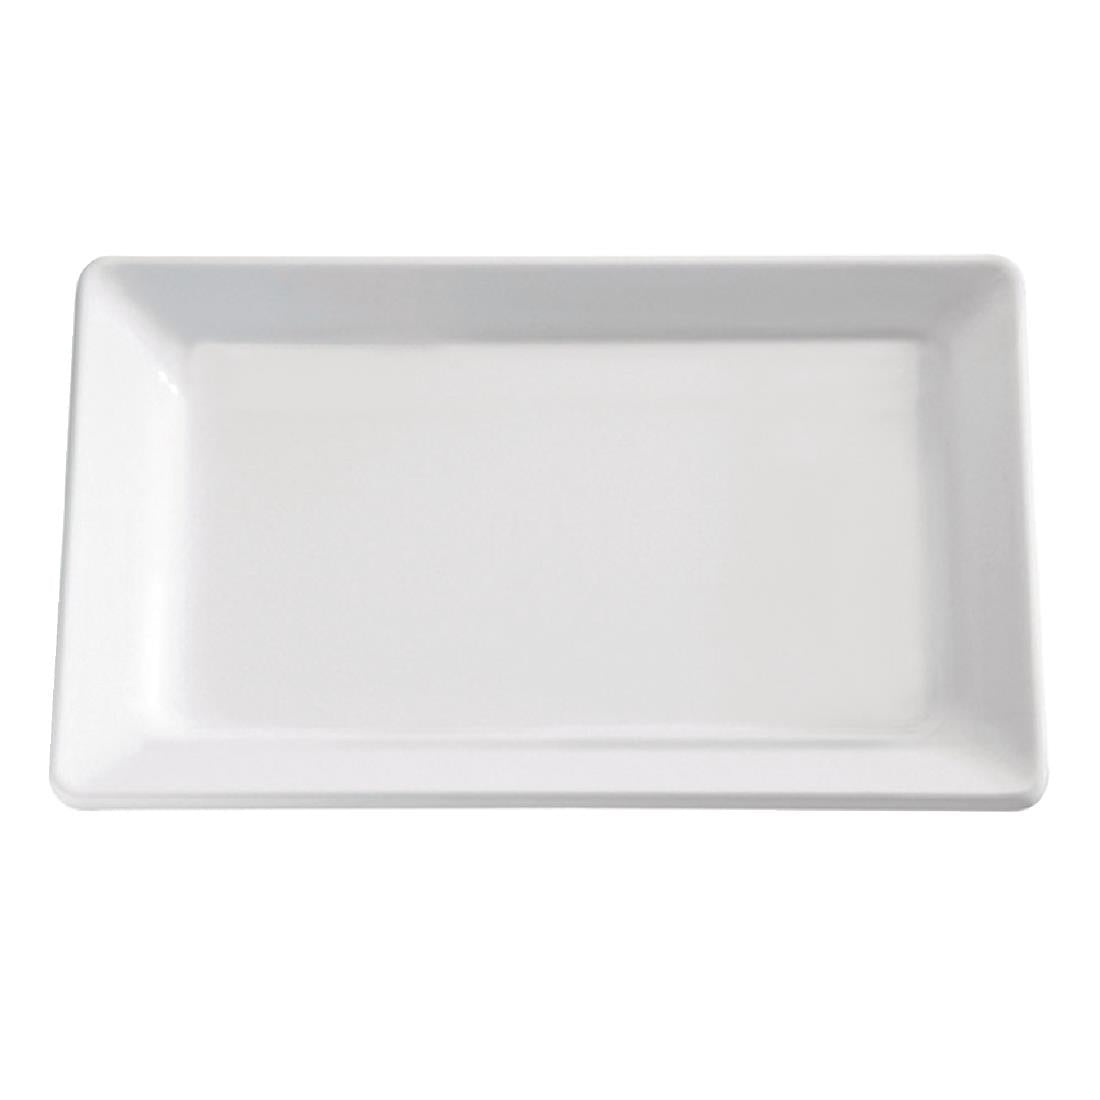 GF126 APS Pure Melamine Tray White GN 1/4 JD Catering Equipment Solutions Ltd